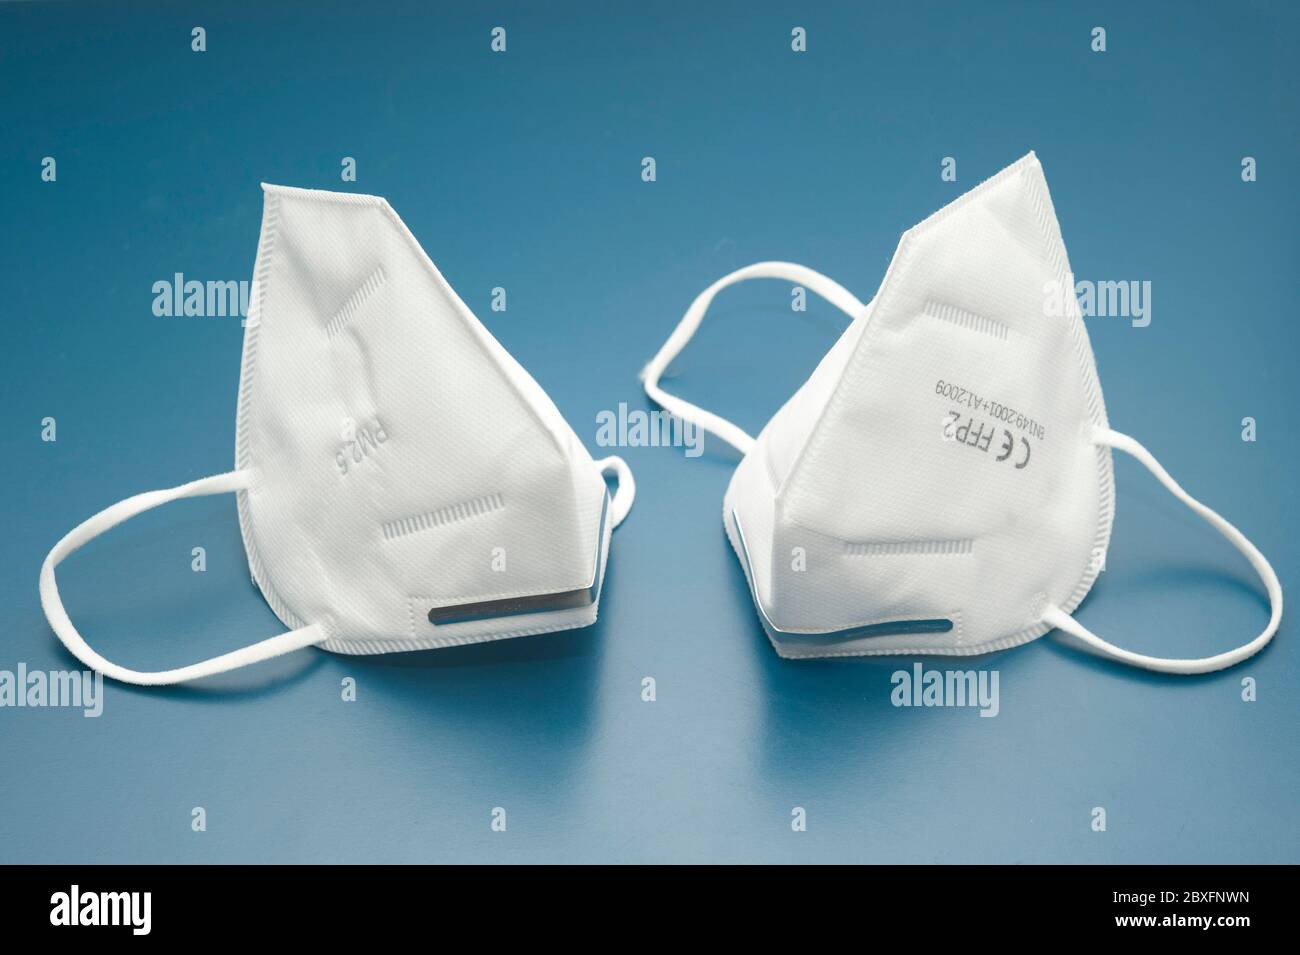 Covid-19 FFP2 or N95 respiratory protection masks Stock Photo